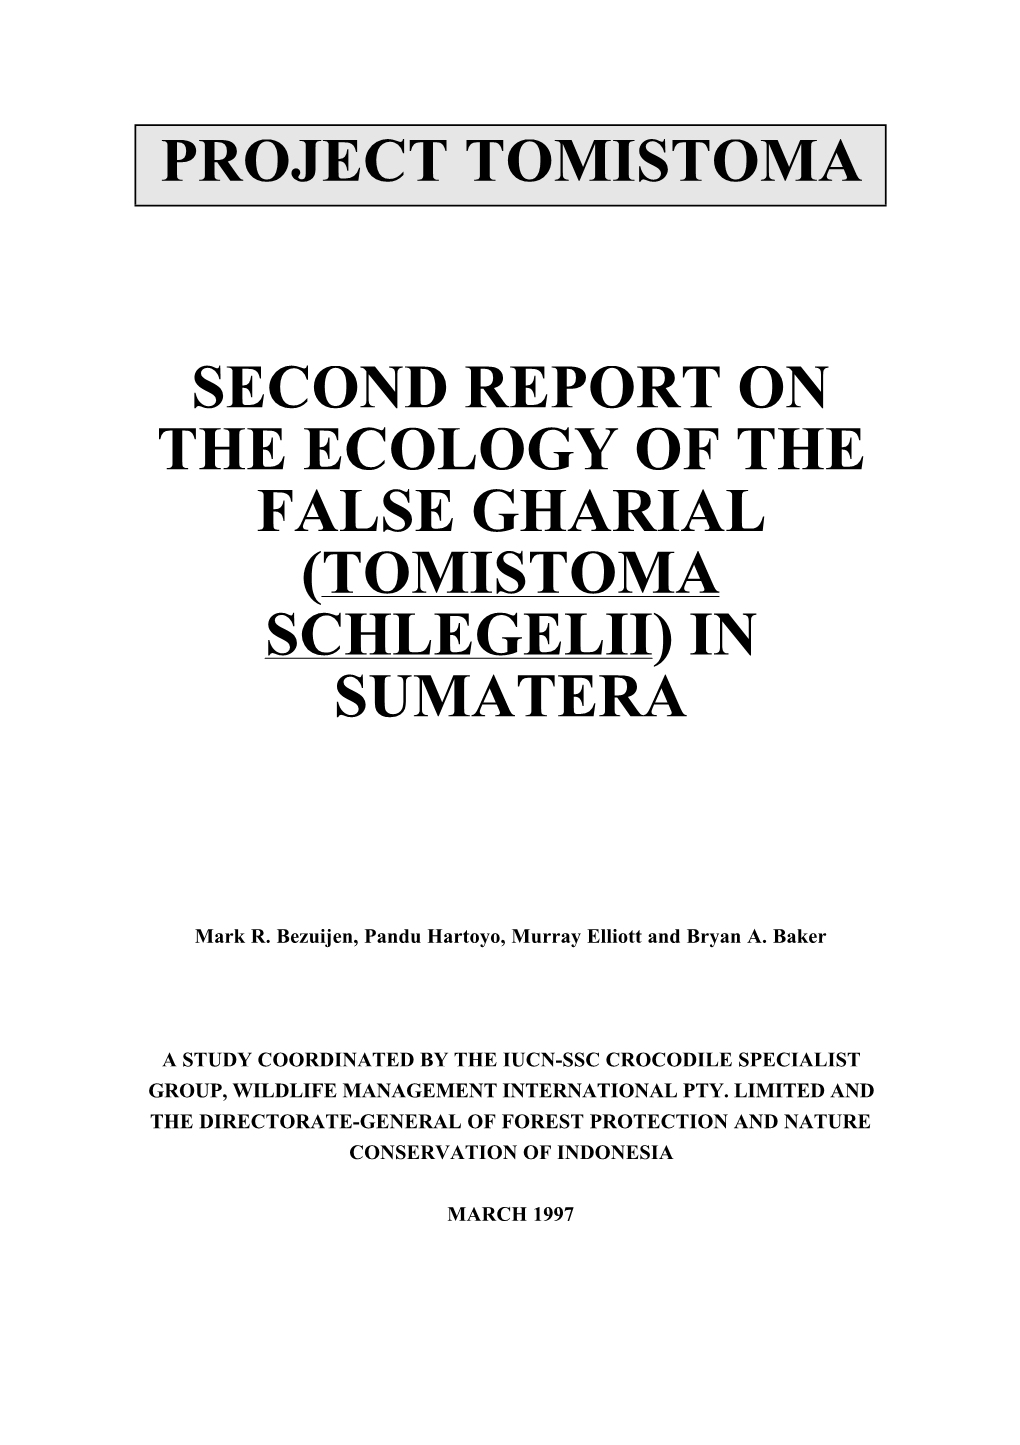 Project Tomistoma Second Report on the Ecology of the False Gharial